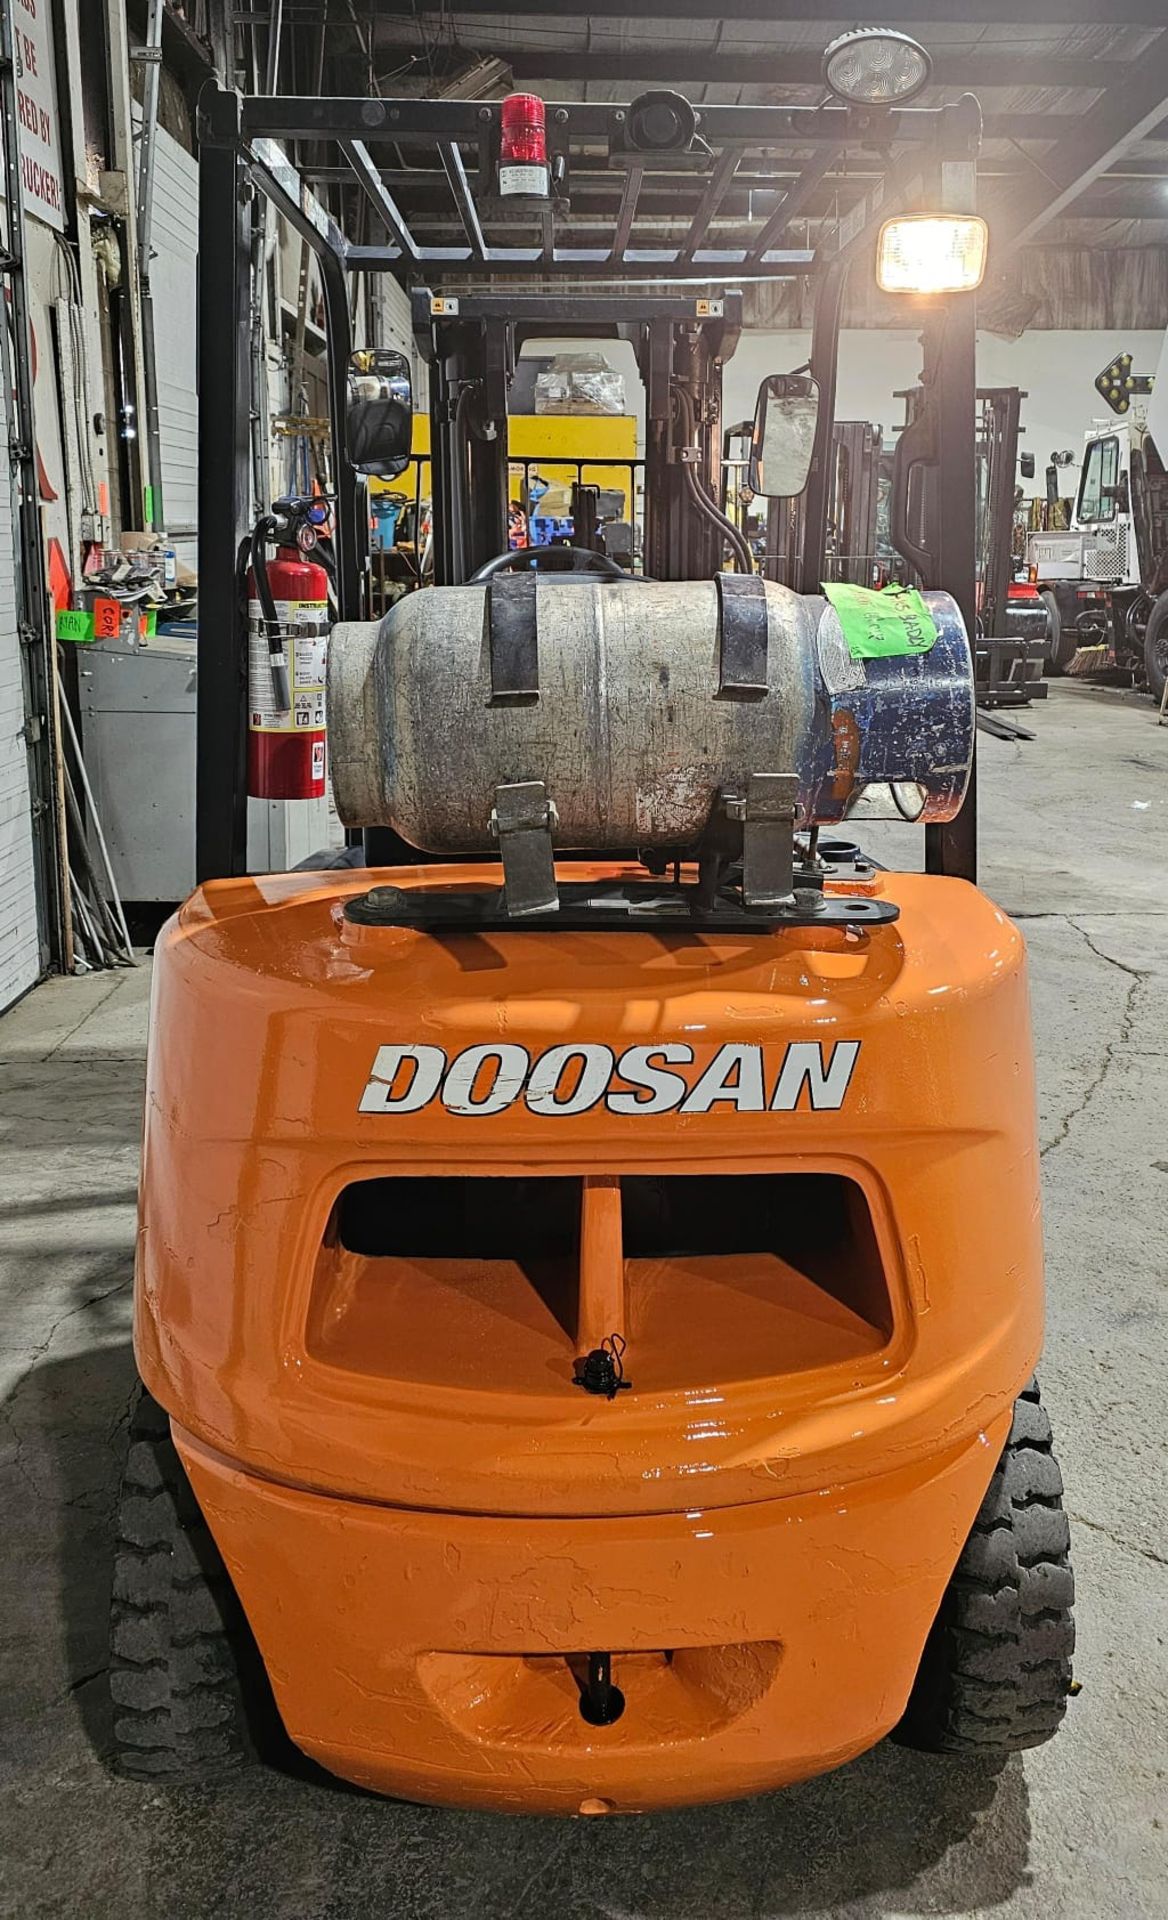 2012 Doosan 6,000lbs Capacity OUTDOOR LPG (Propane) with LOW HOURS Forklift 3-stage 189" load height - Image 5 of 7